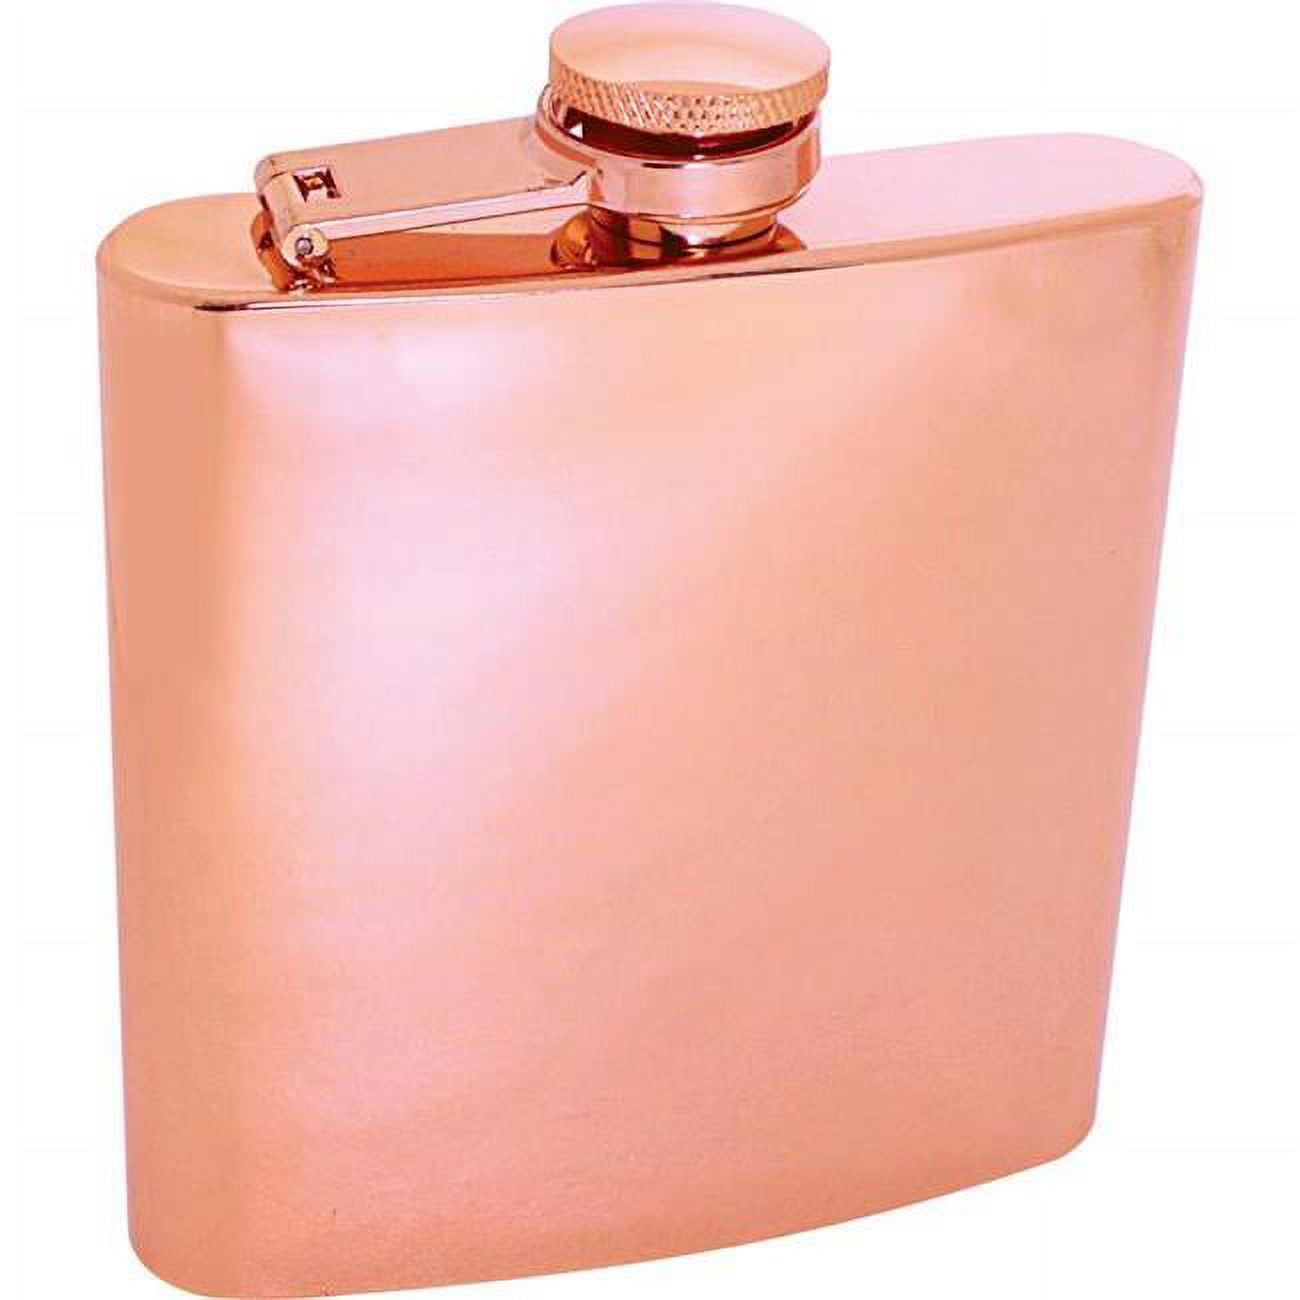 Ktflkc6 6 Oz Copper-tone Plated Stainless Steel Flask